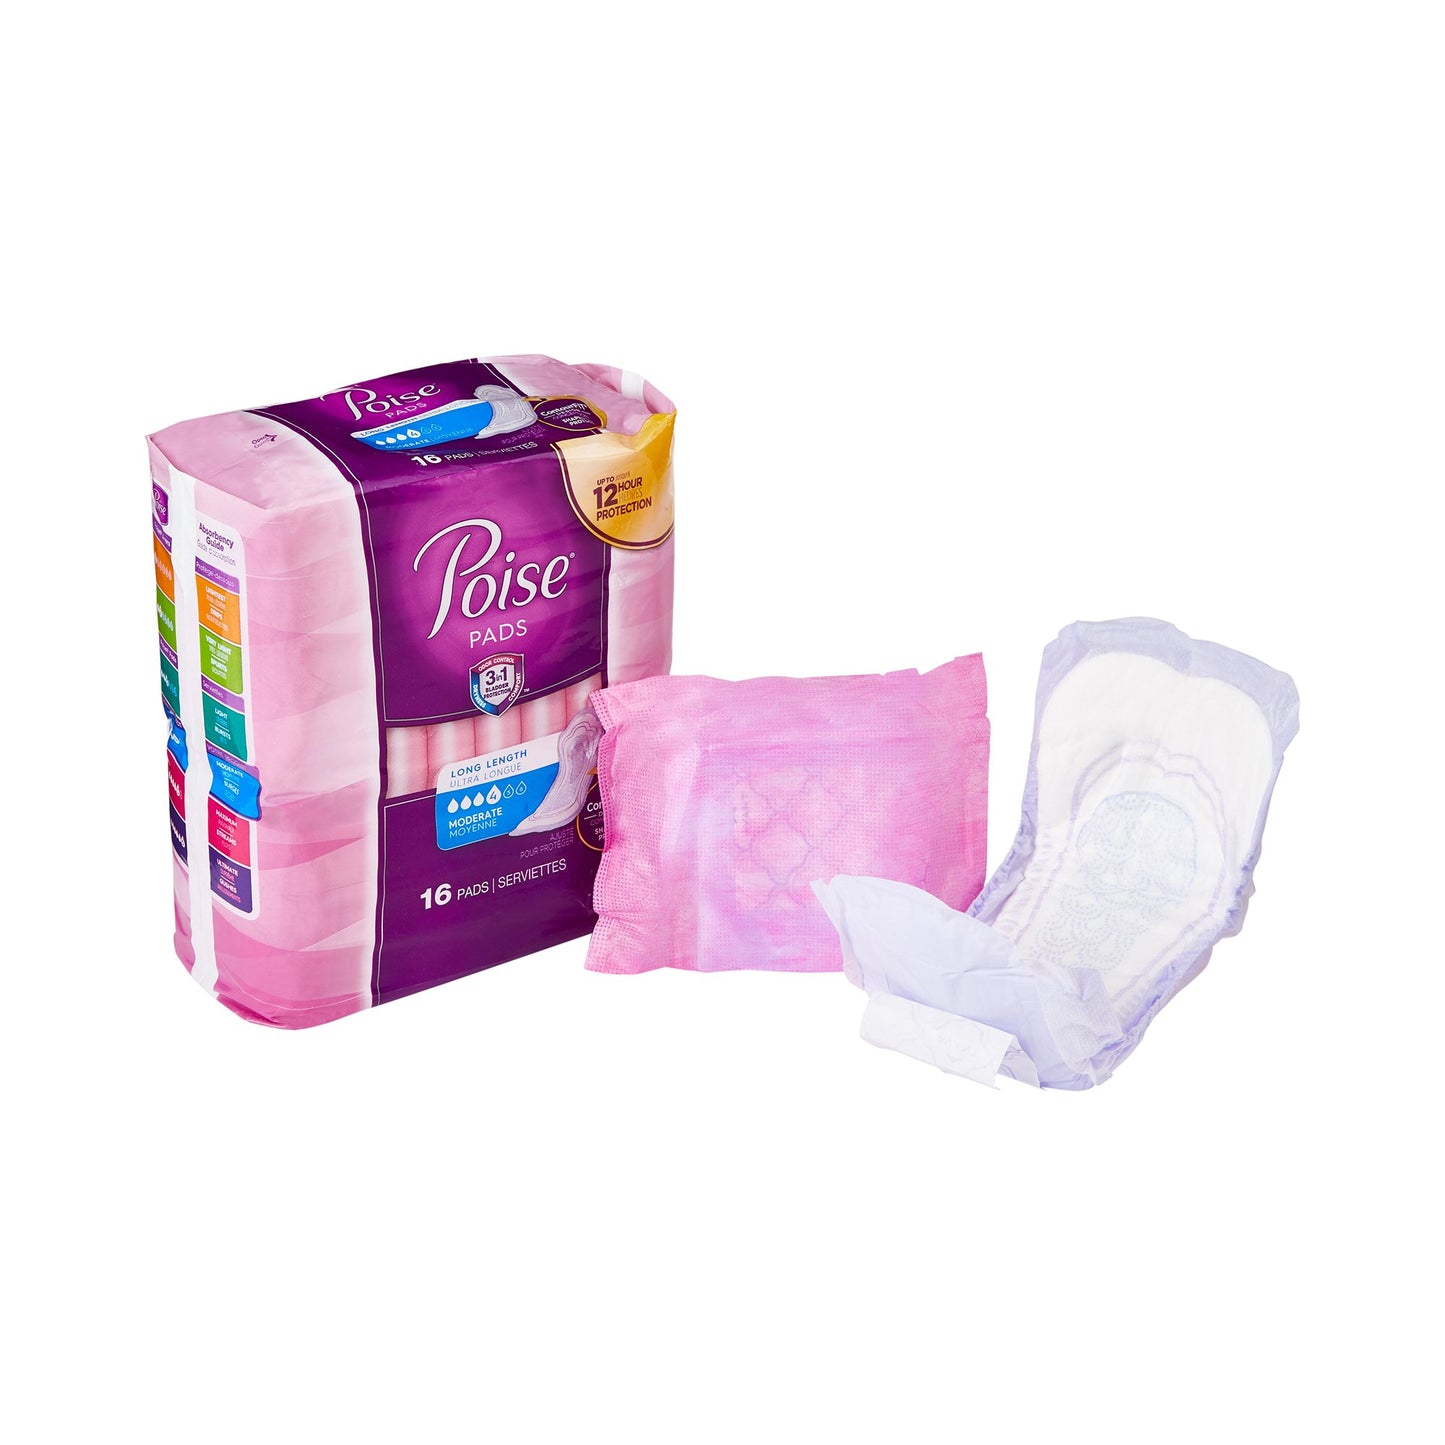 Poise Bladder Control Pads, Adult Women, Moderate Absorbency, Disposable, 12.4" Length, 16 ct